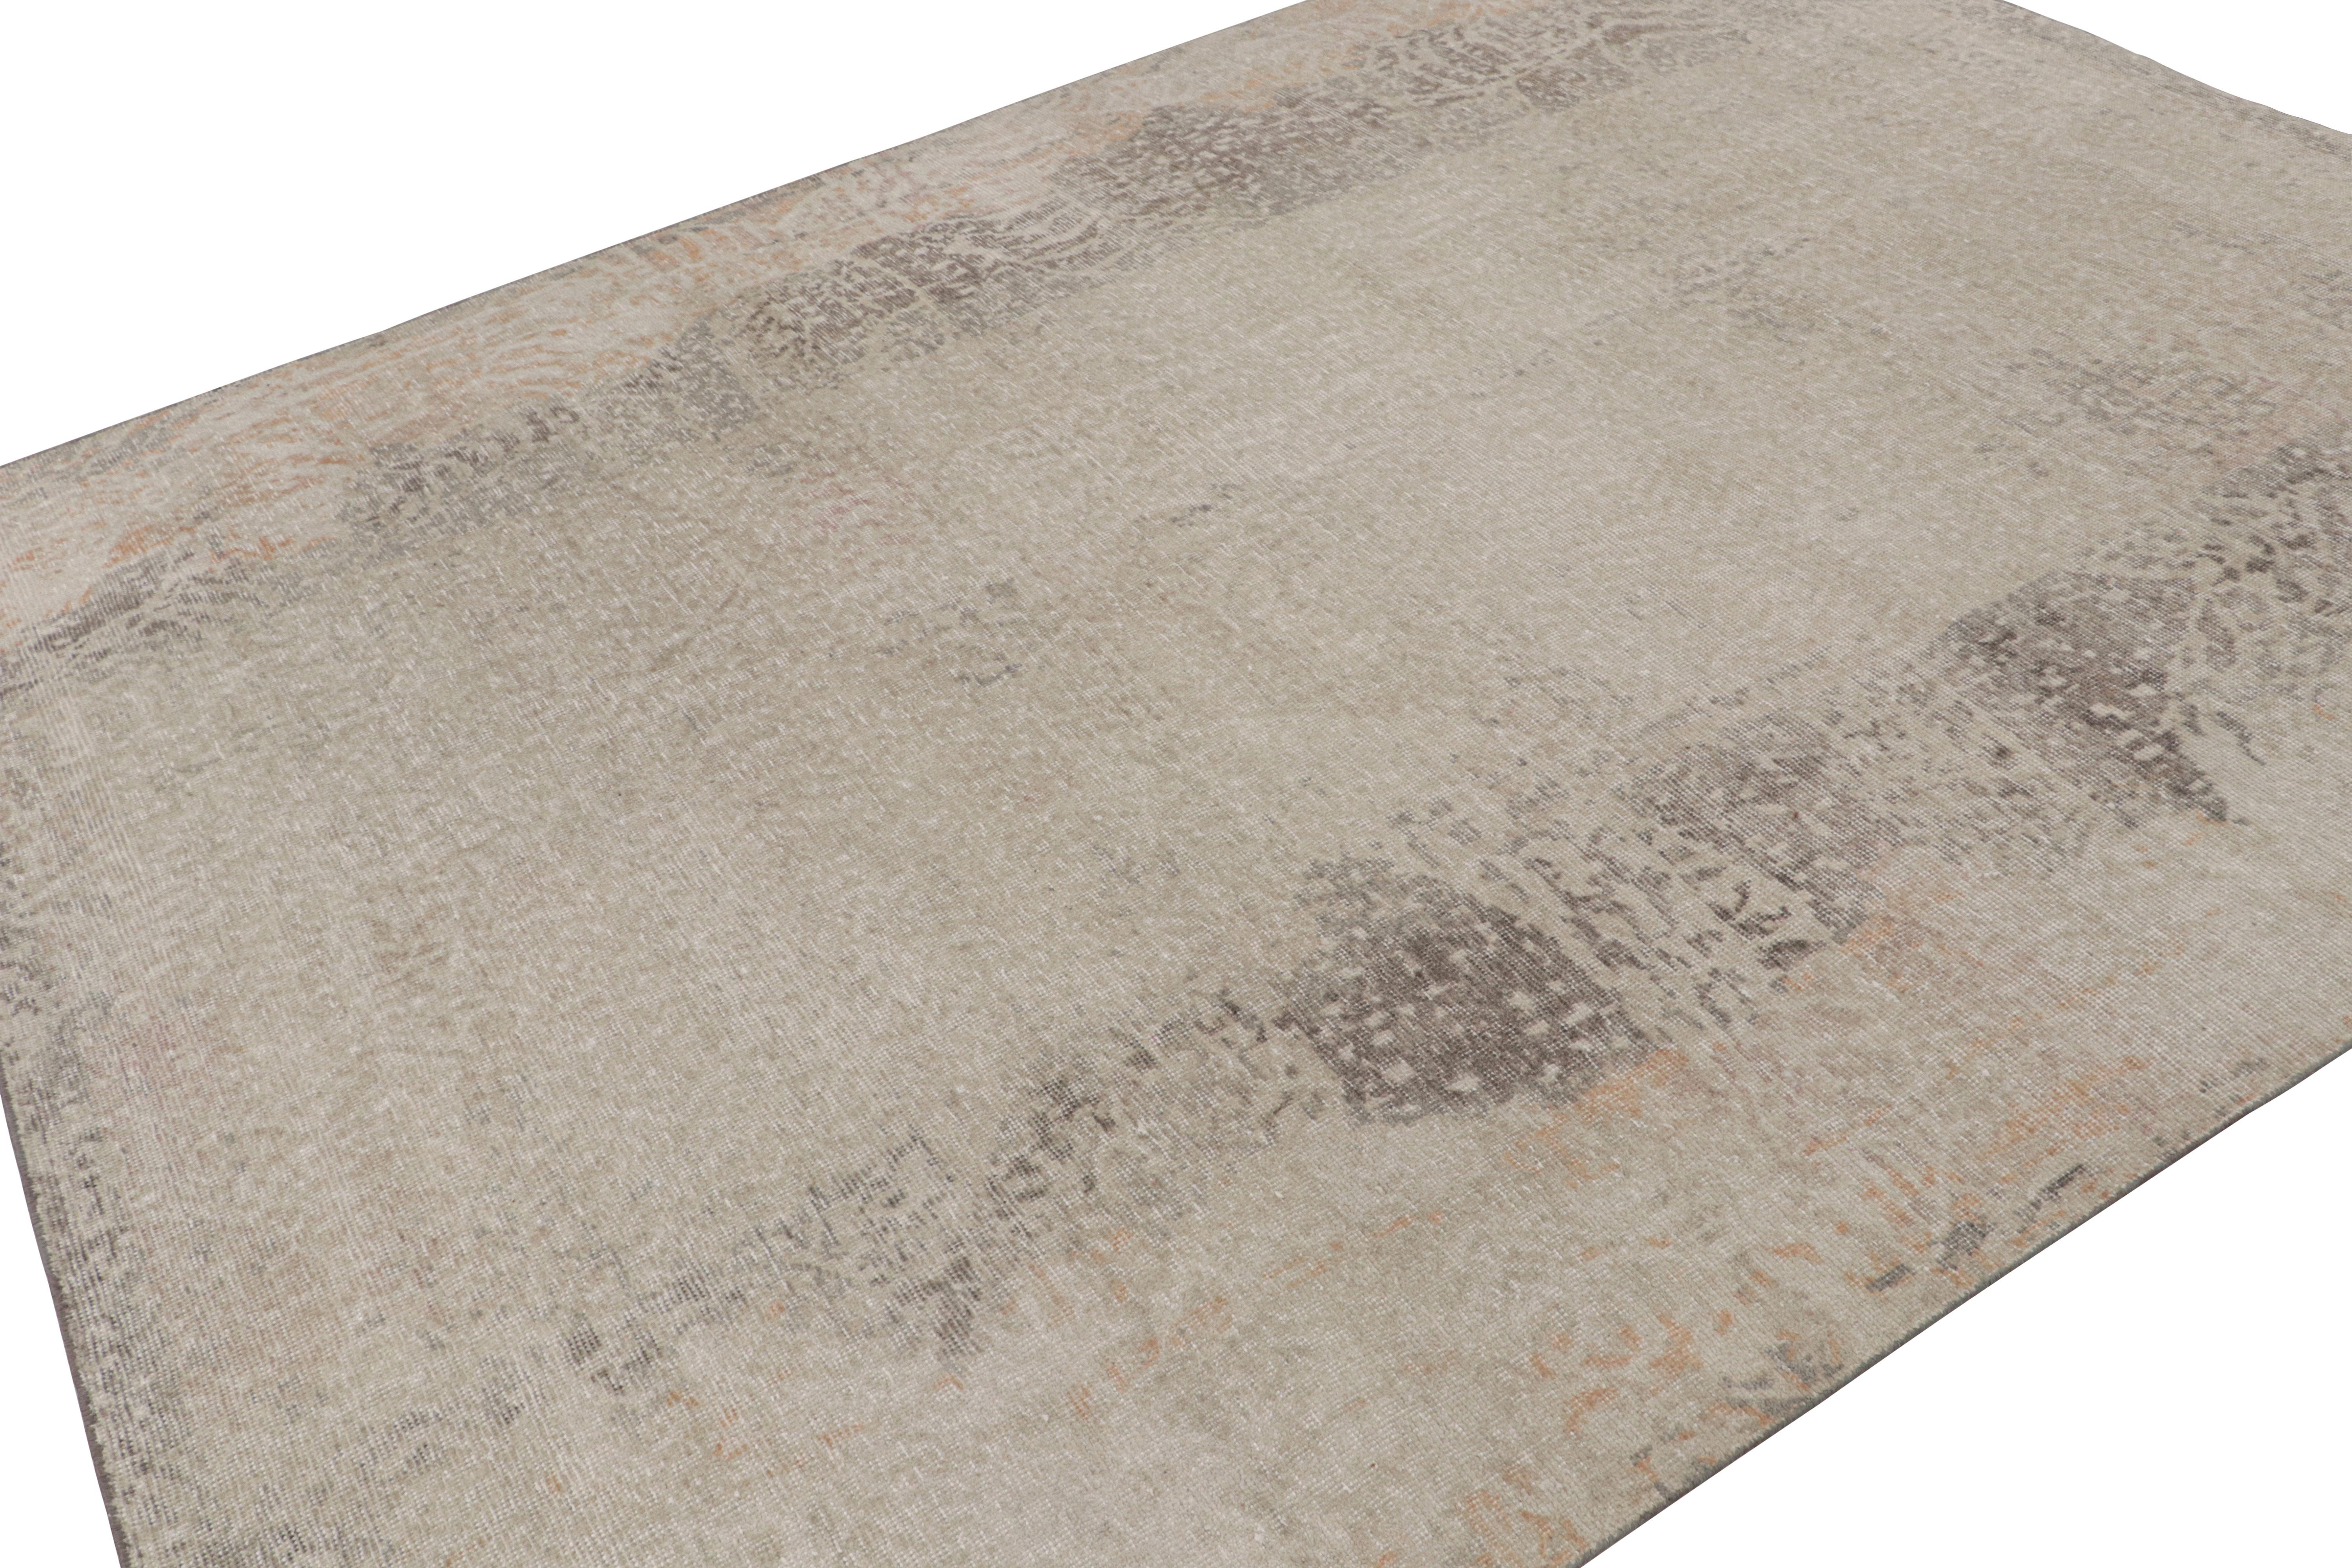 This 8x9 contemporary abstract rug is from Rug & Kilim’s Homage collection. Hand-knotted in wool.

On the Design:

The minimalist piece is inspired by an abstraction of animal prints. Keen eyes will note taupe tones and rust accents underscoring